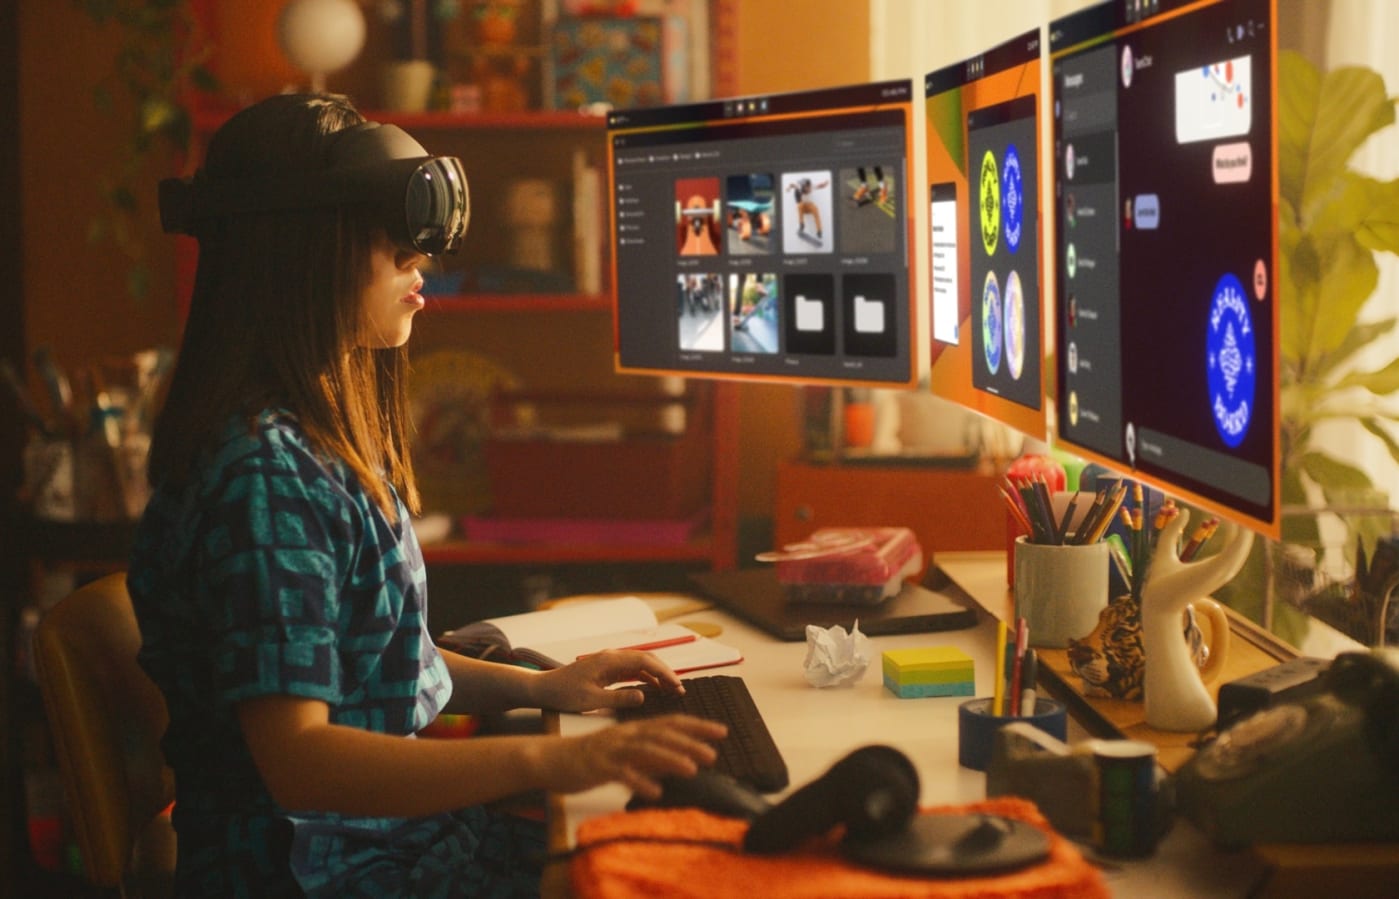 Microsoft Office apps are coming to Meta Quest VR headsets